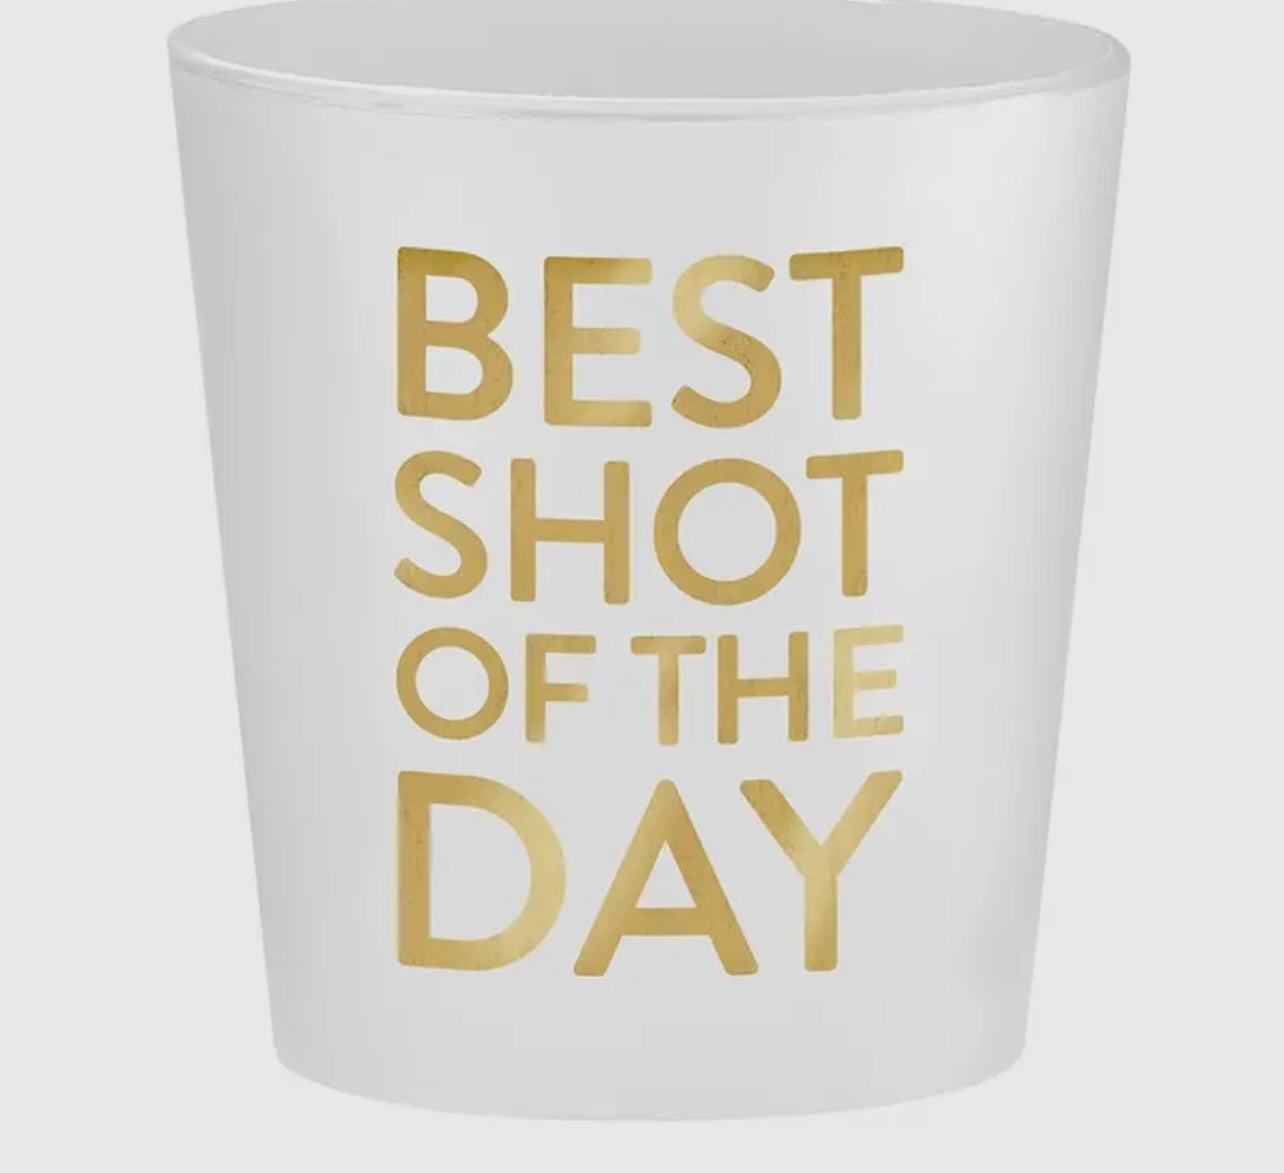 Best shot of the day shot glasses